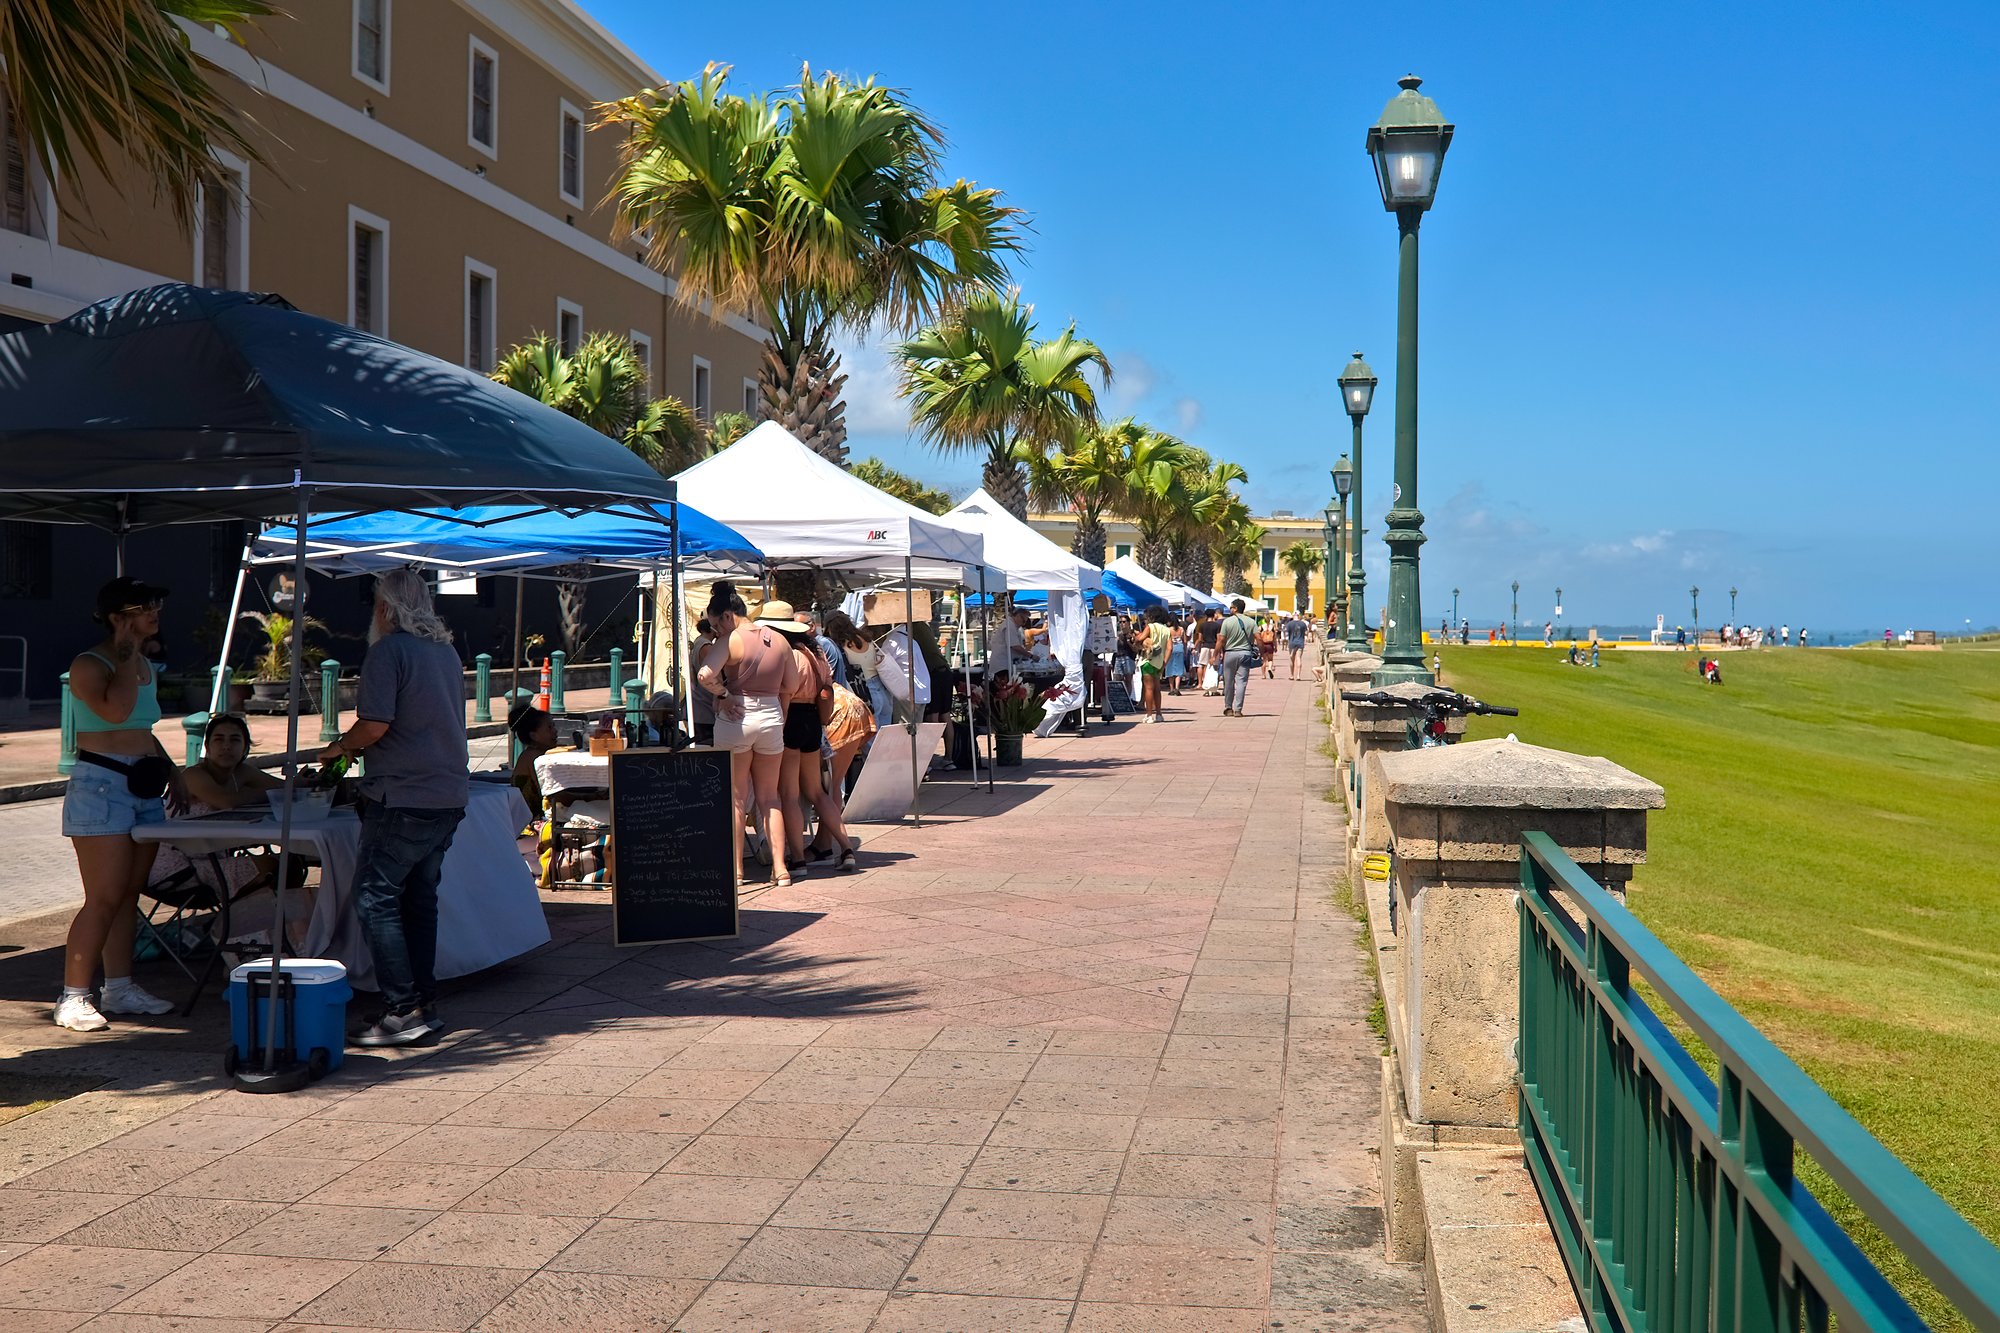 View of the farmers market in Old San Juan